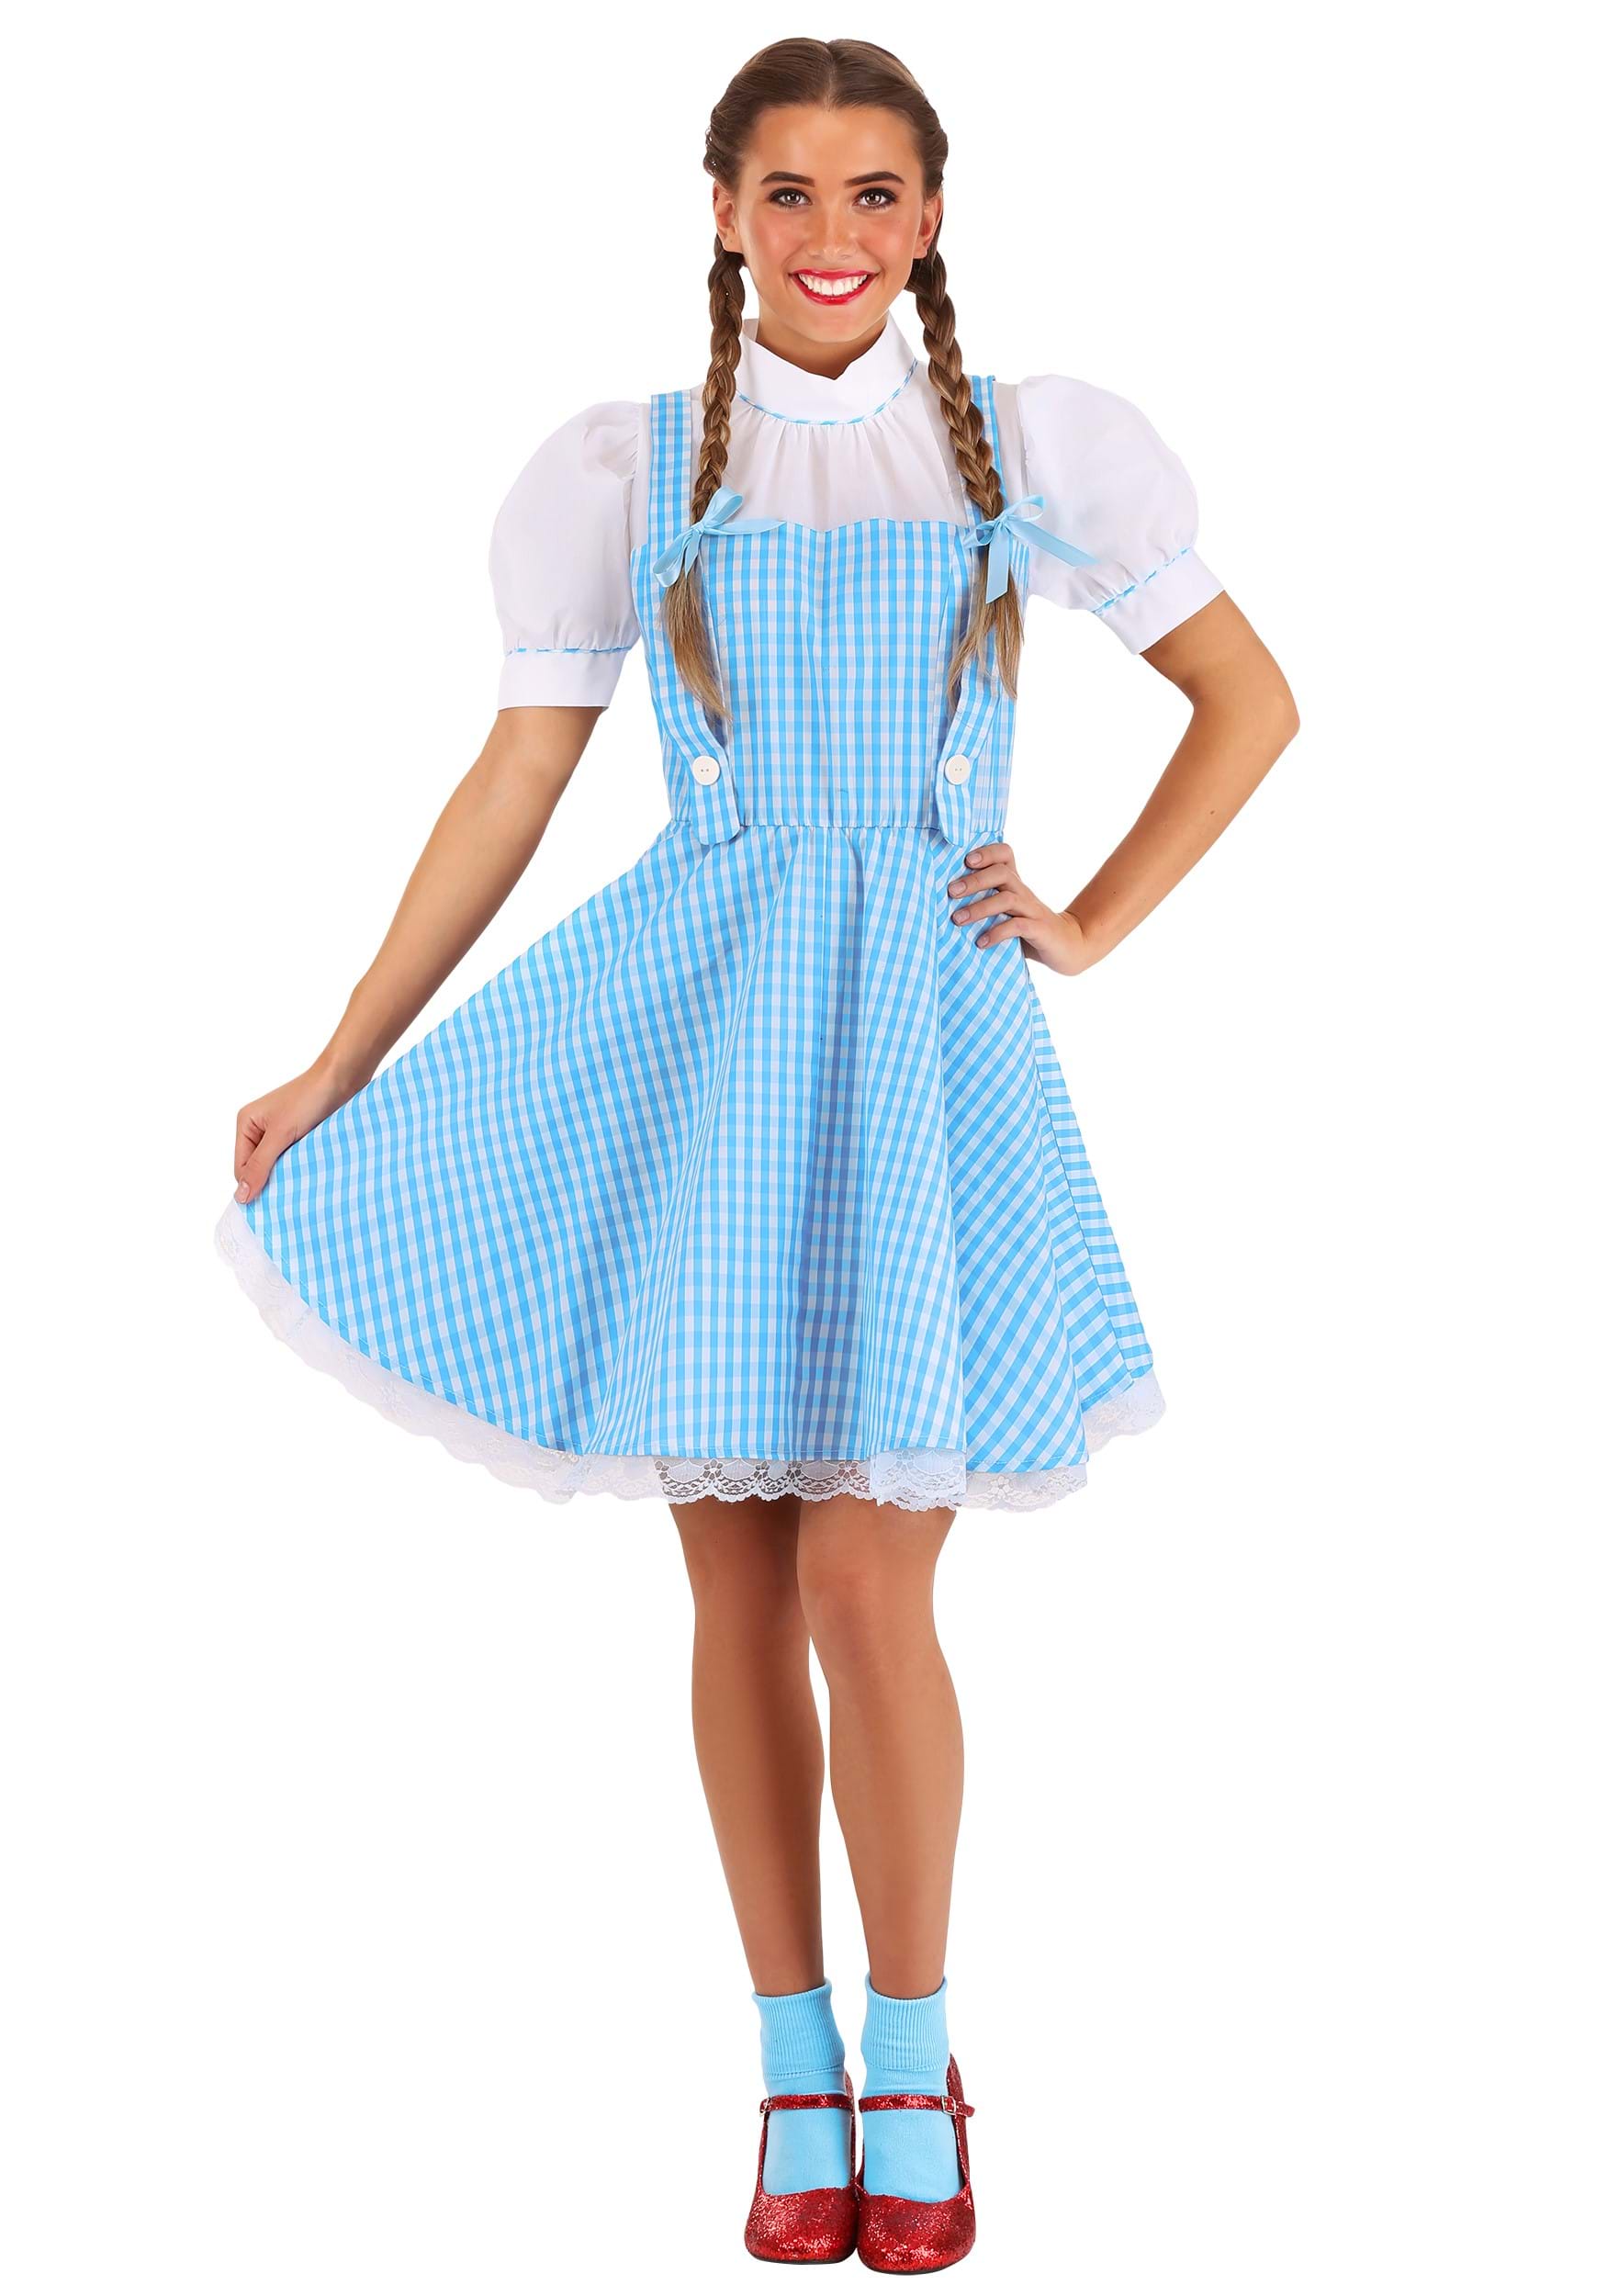 Photos - Fancy Dress Wizard Jerry Leigh  of Oz Dorothy Costume for Adults Blue/White FUN1430 